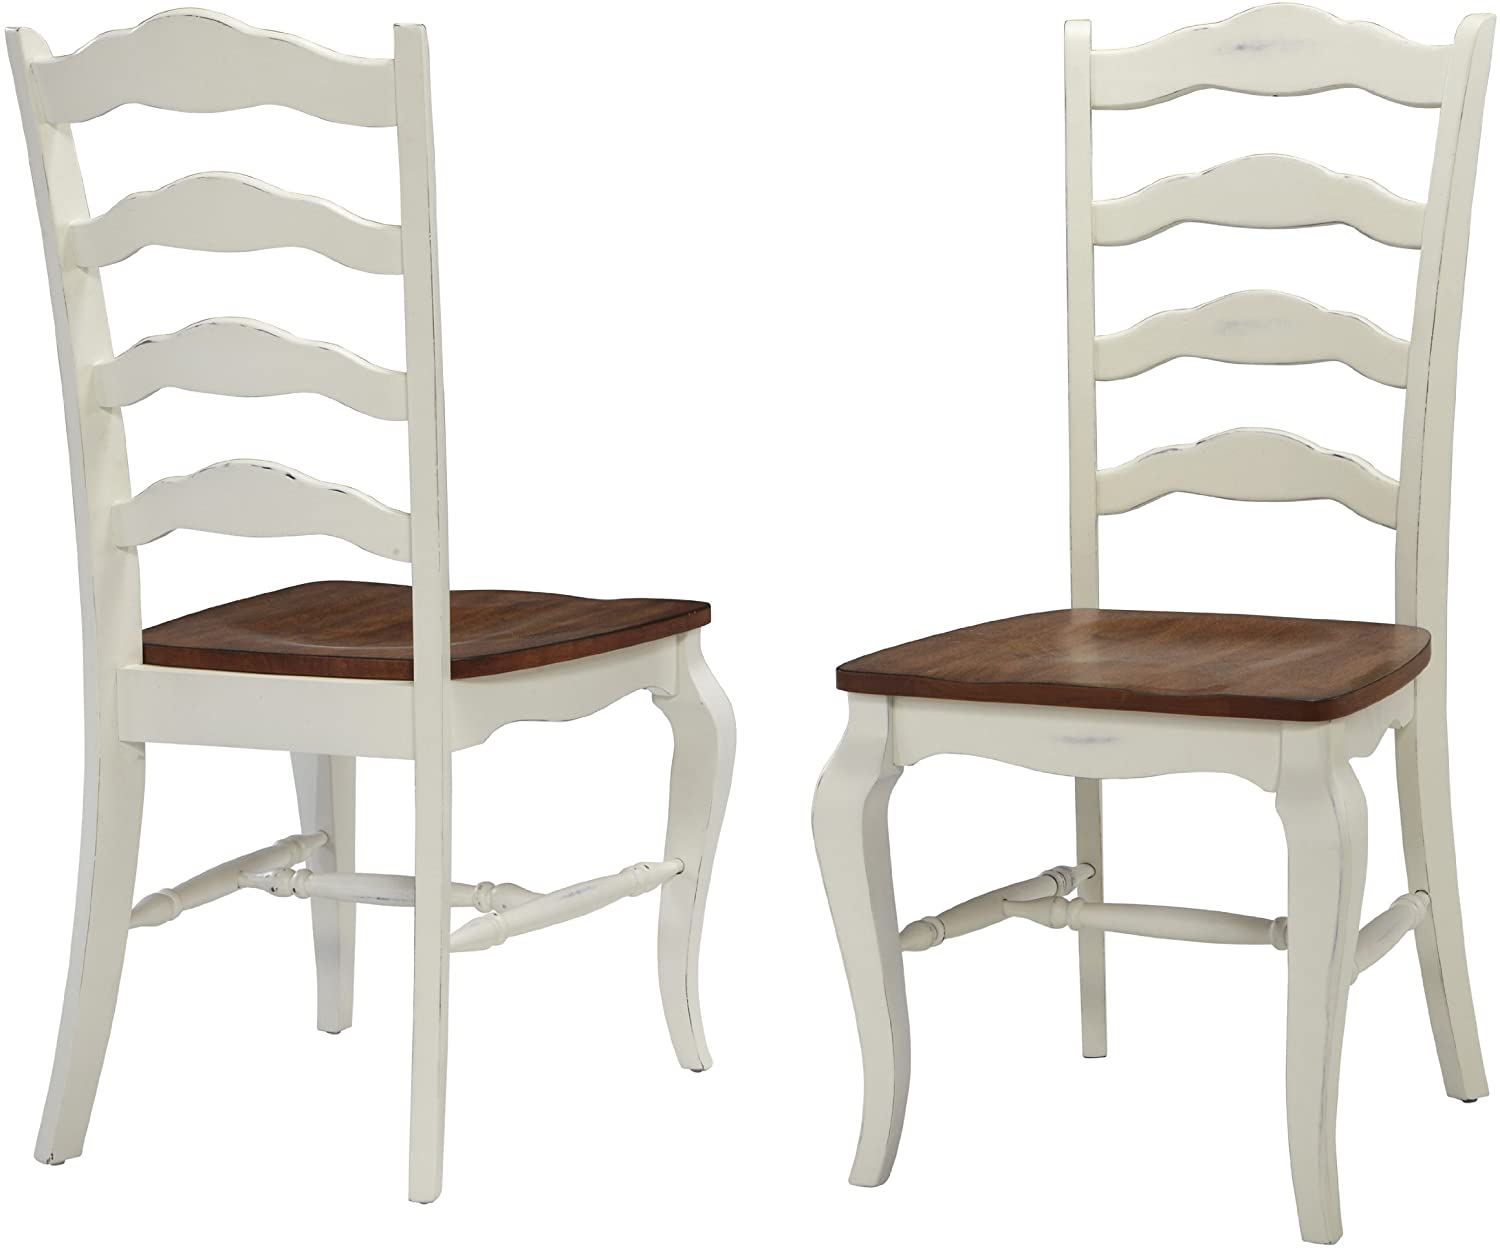 B00G12WGMG Home Styles French Countryside Oak/White Pair of Chairs with Distressed Oak and Rubbed White Finish